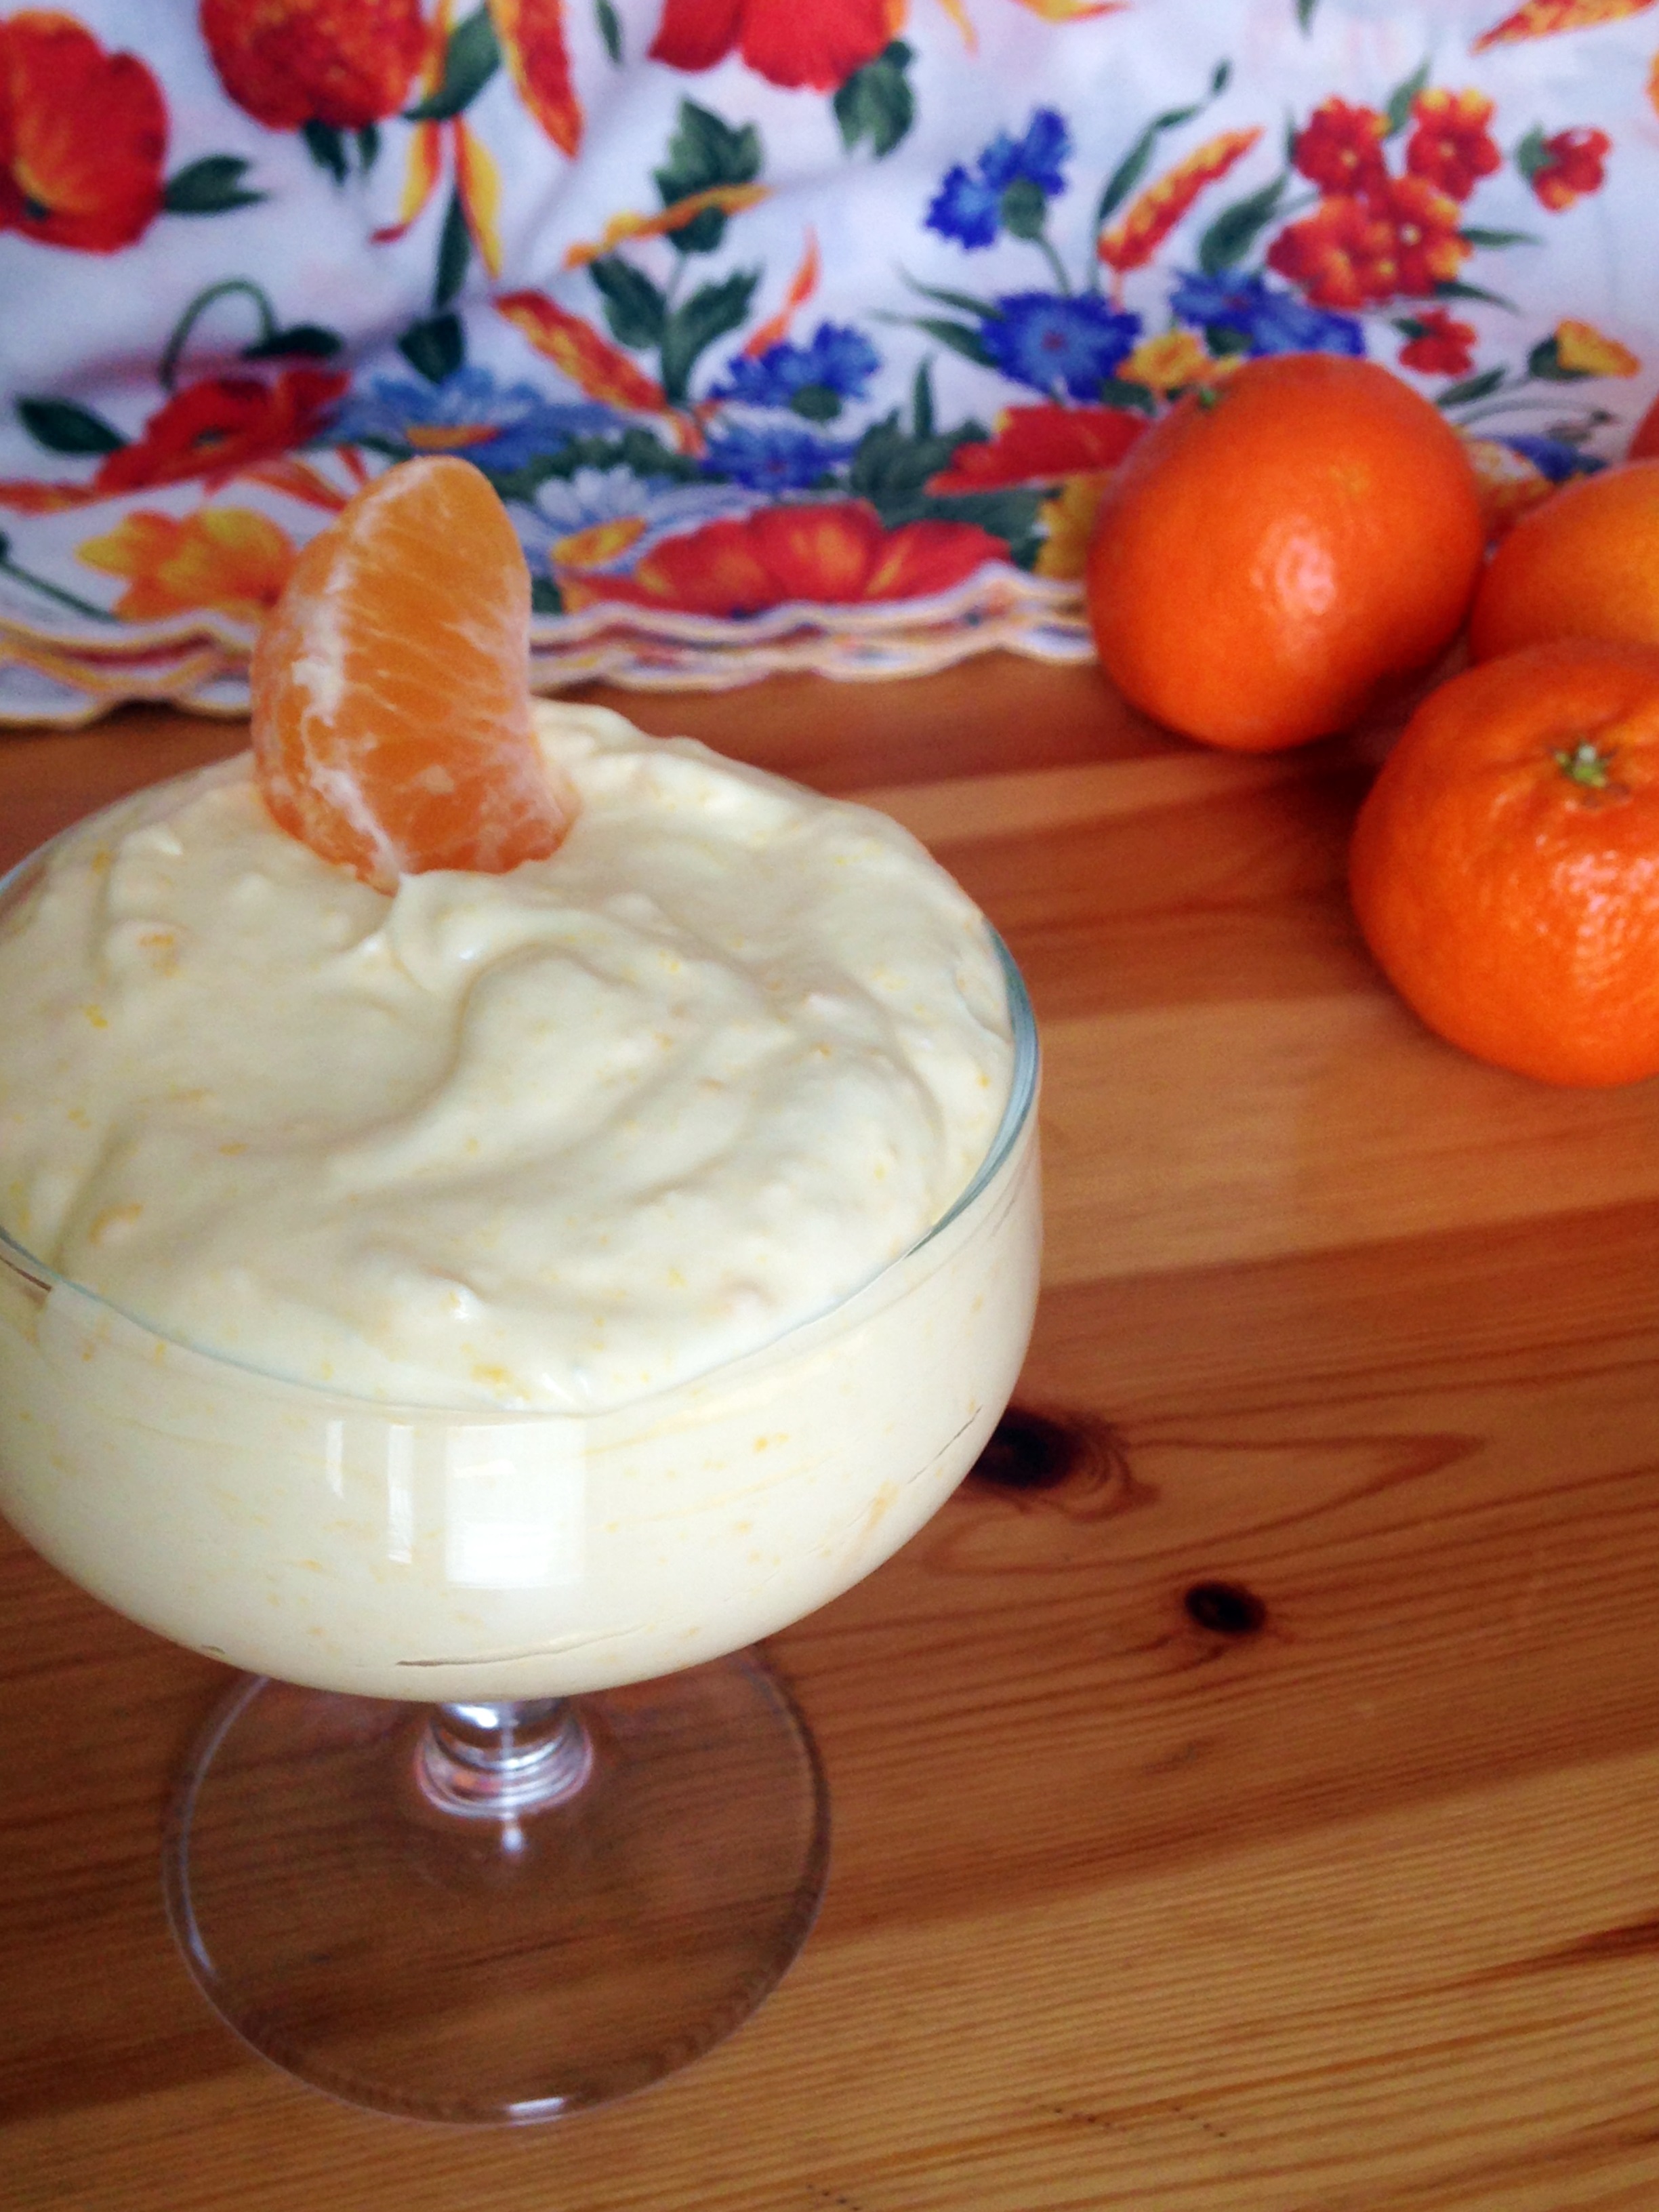 mousse alcolica alle clementine